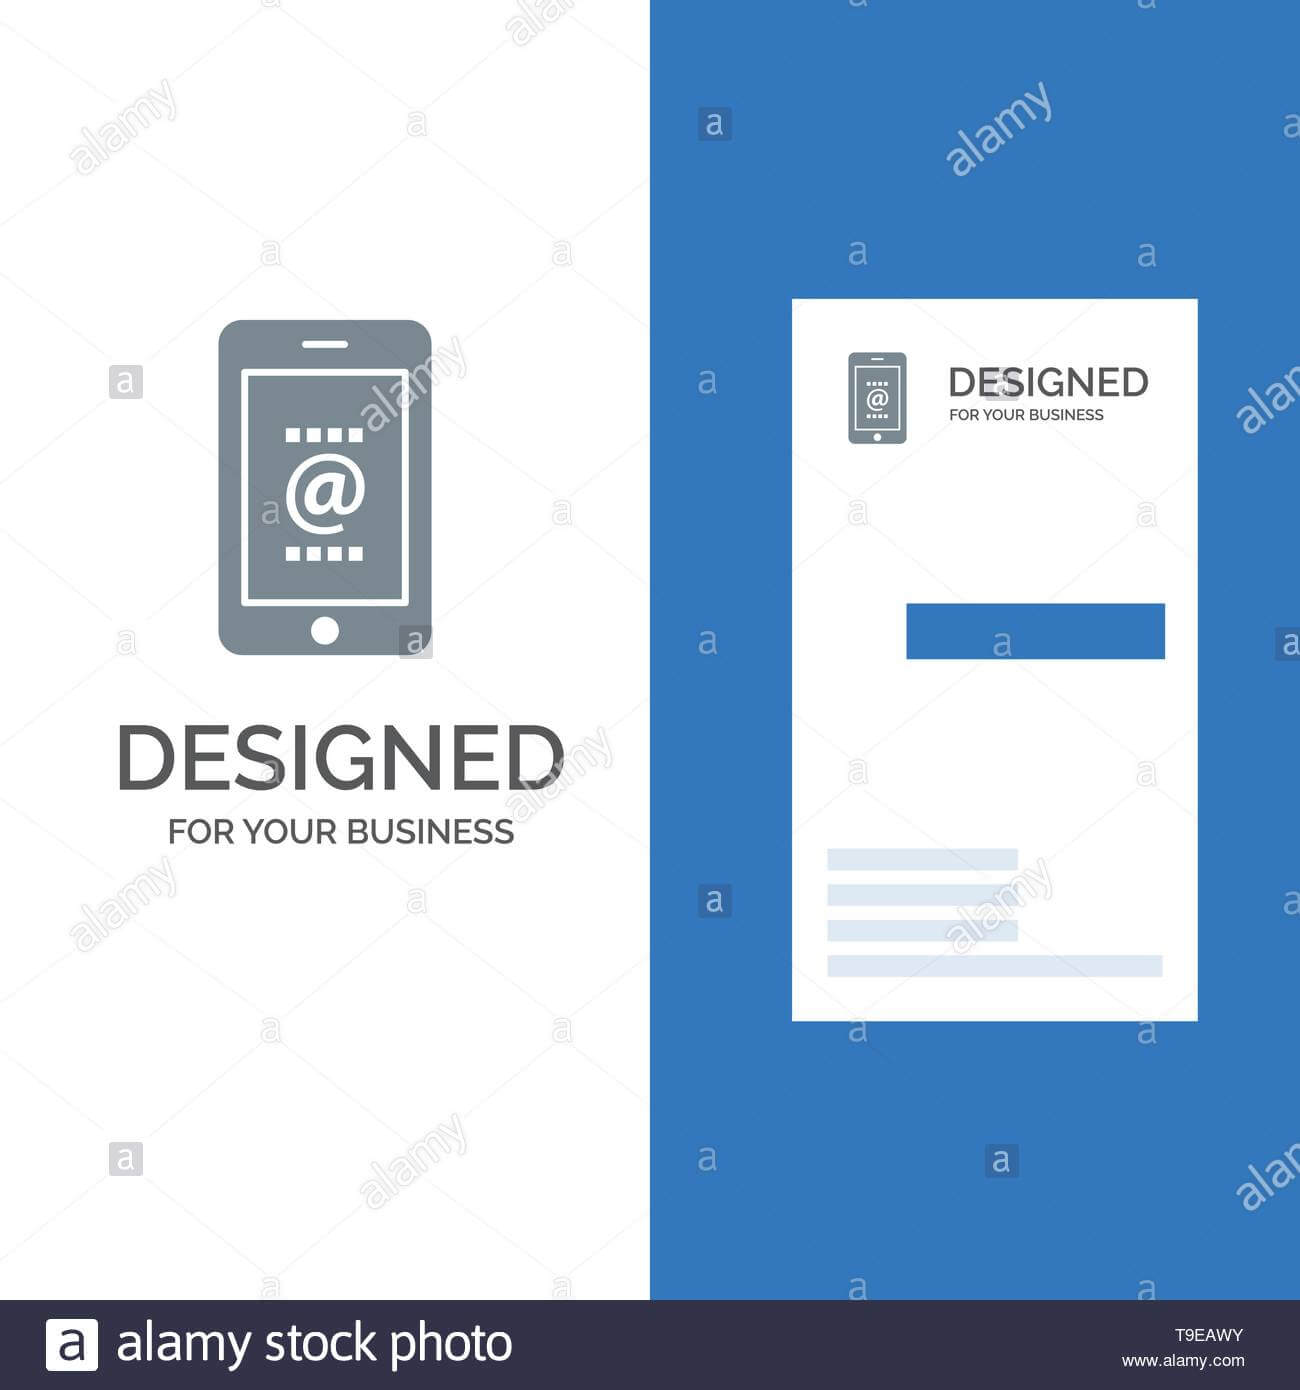 Personal Id Card Stock Photos & Personal Id Card Stock With Personal Identification Card Template